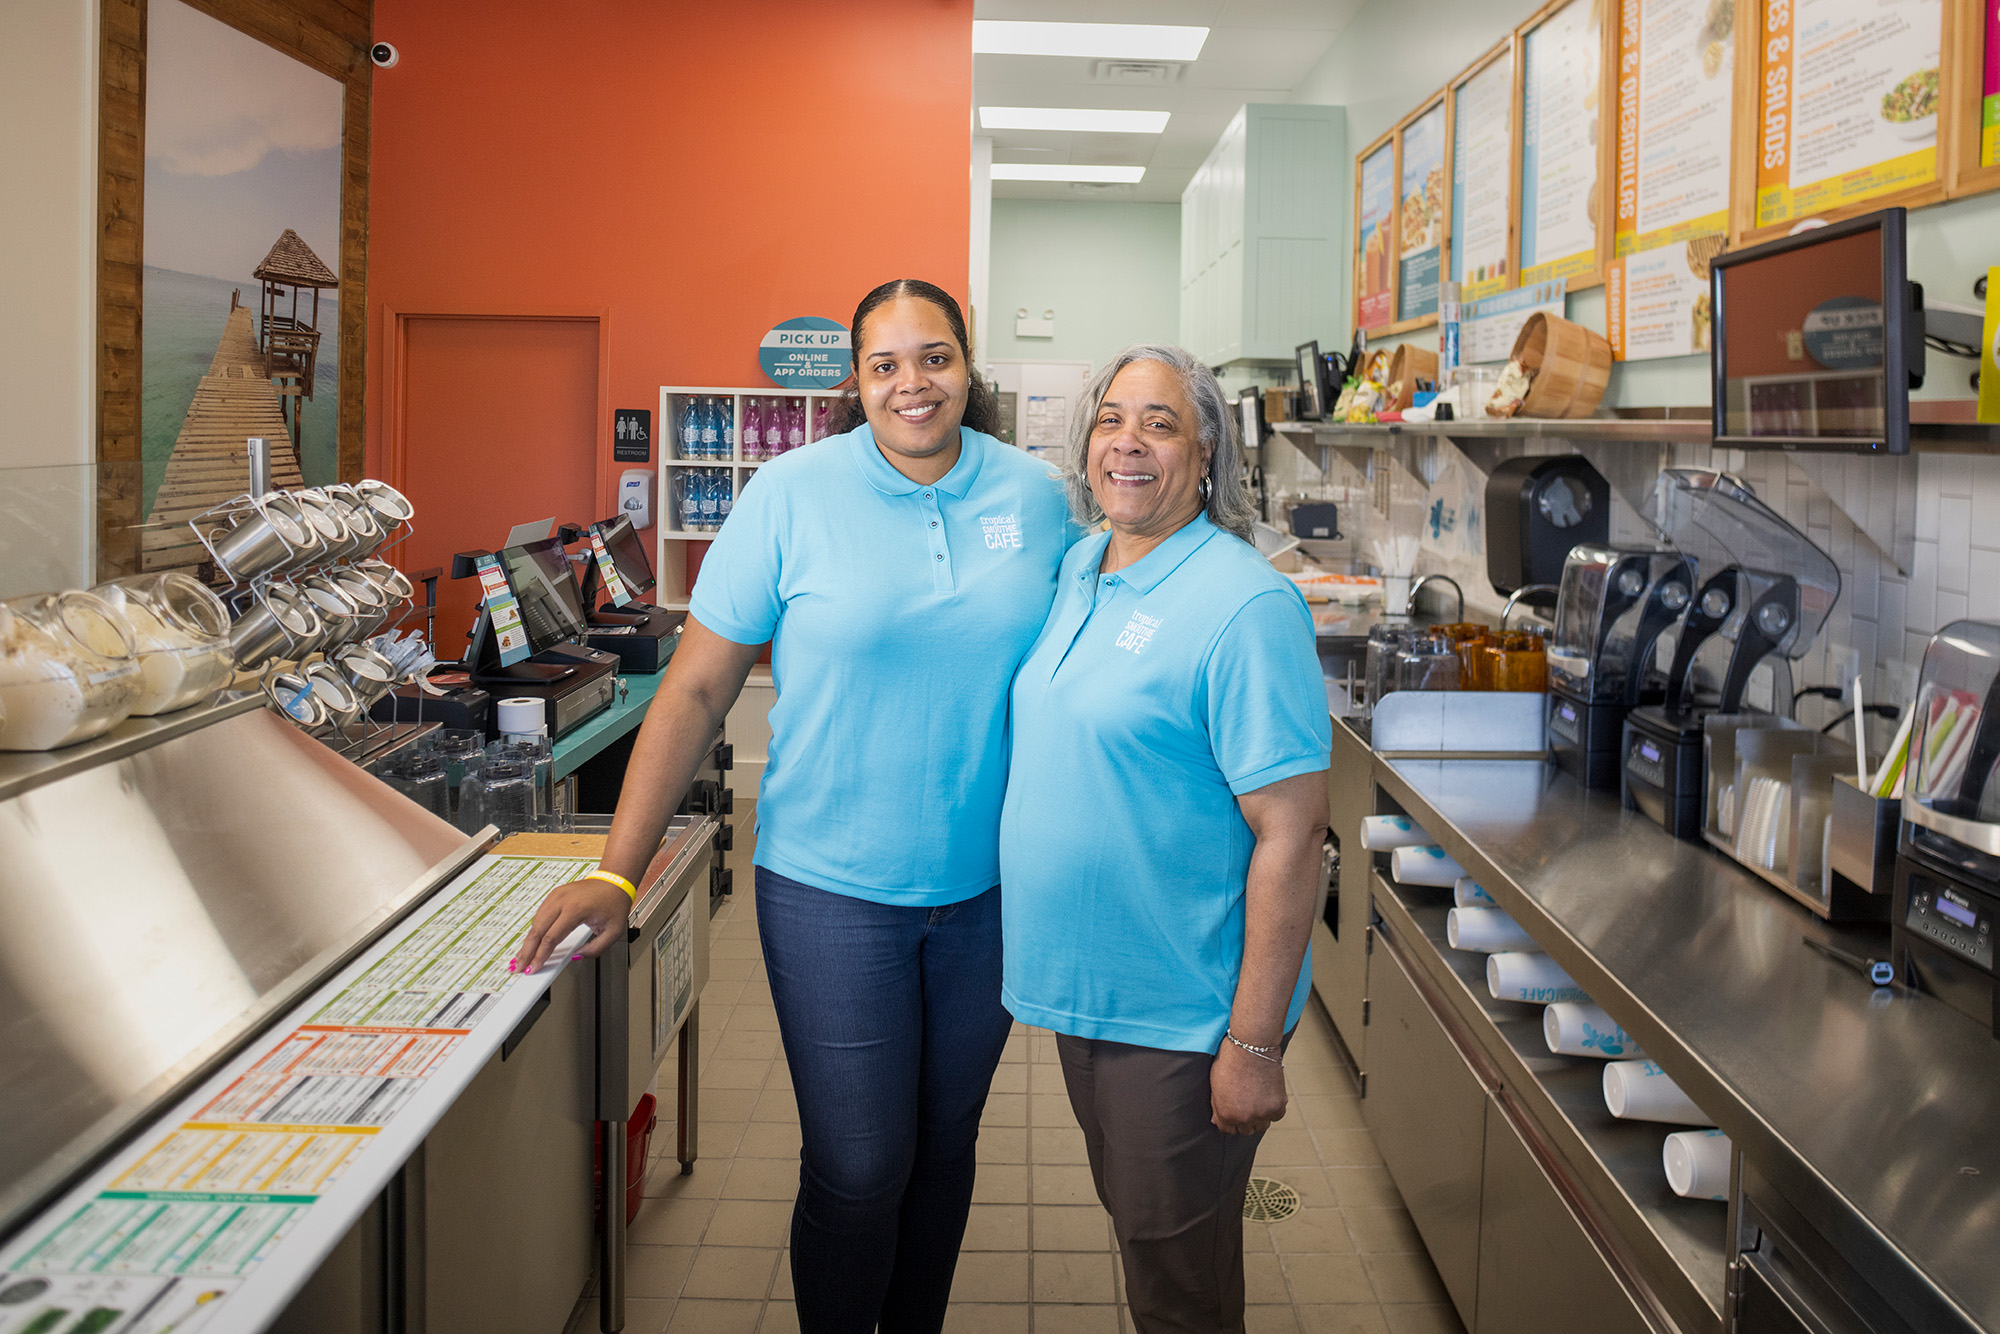 Two women in matching blue shirts stand together in a restaurant kitchen